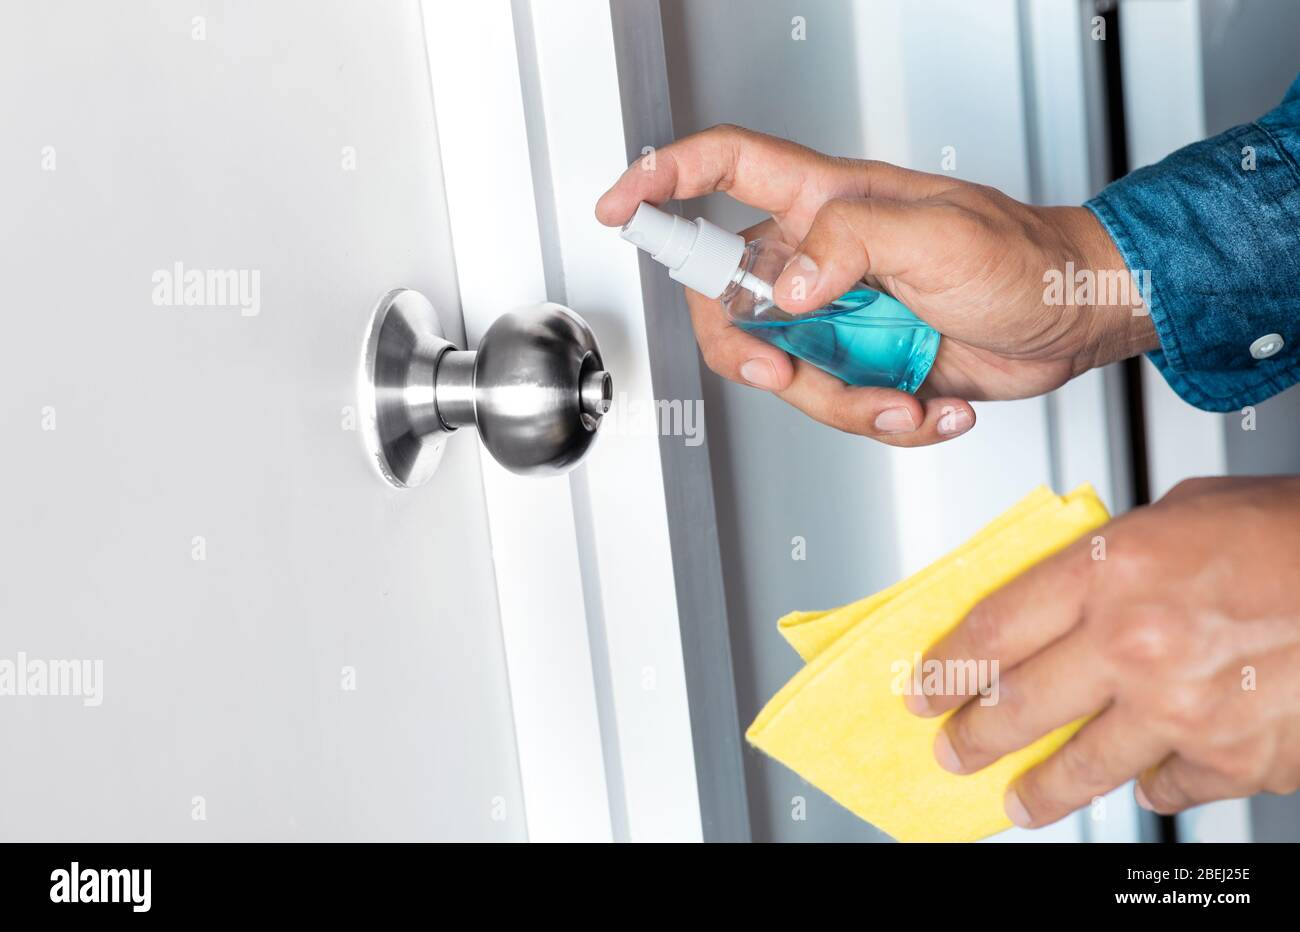 Prevention concepts on coronavirus ( covid-19 ) outbreak situation with person cleaning doorknob by alcohol.body health care.protect yourself.healthy Stock Photo